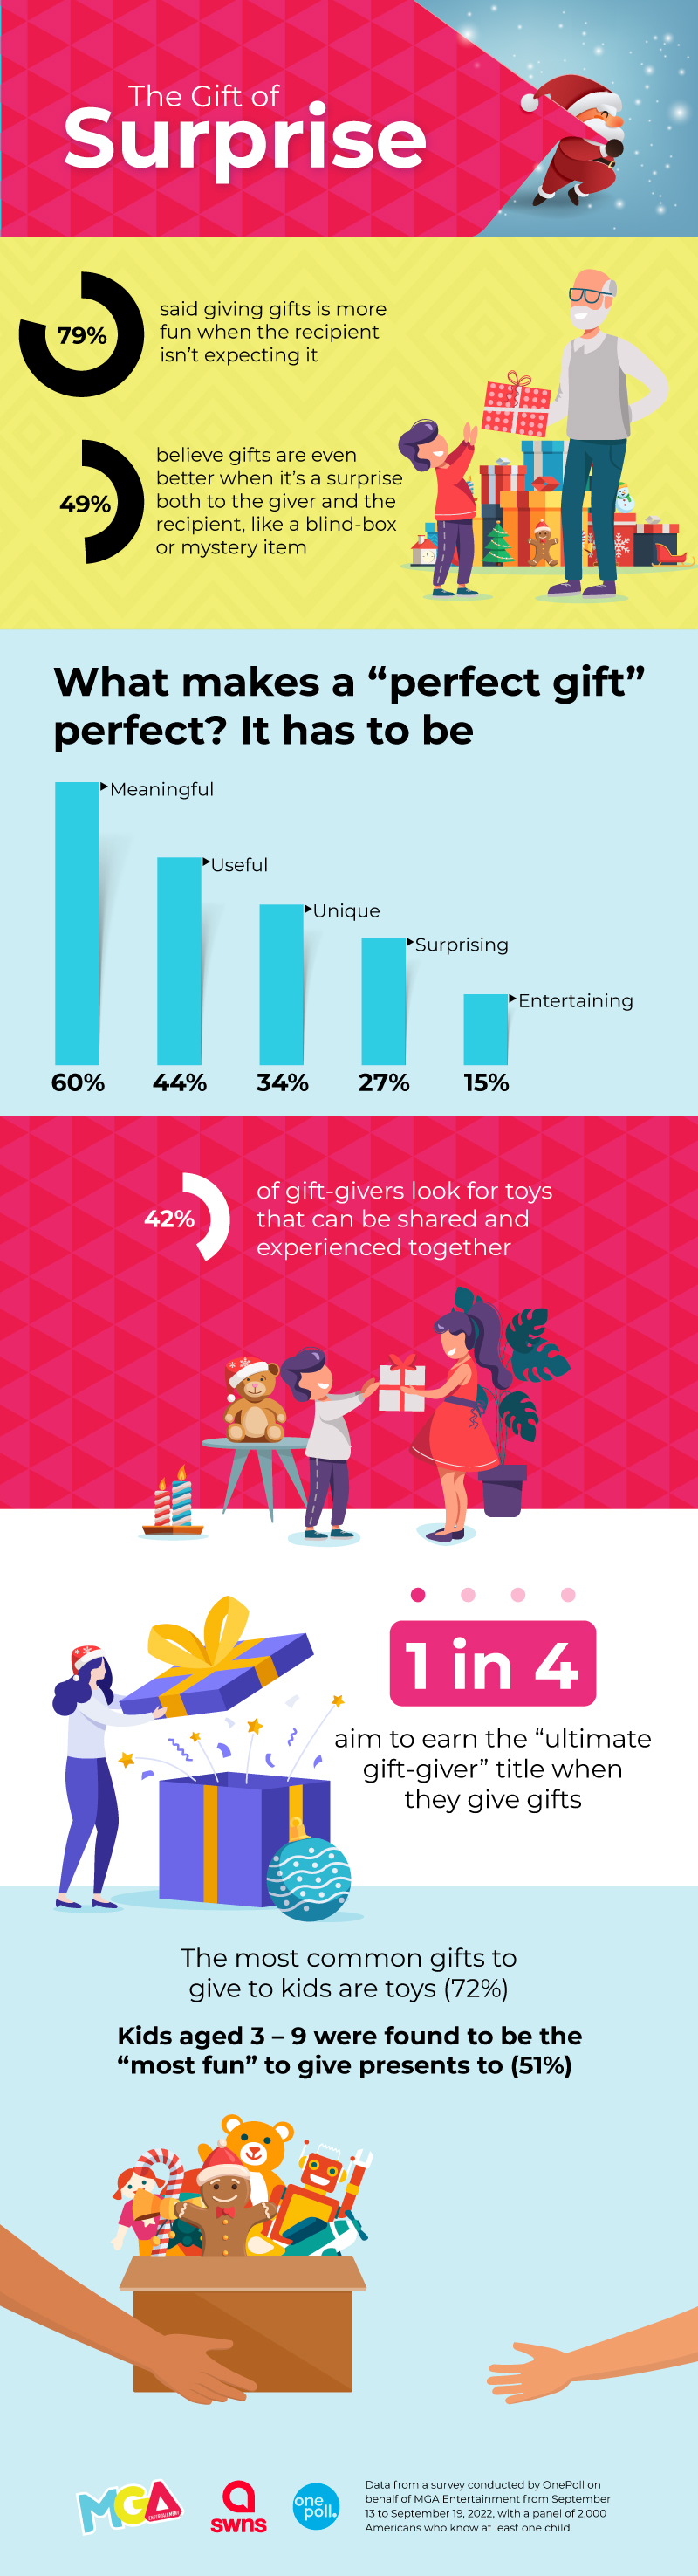 The Gift of Surprise Infographic